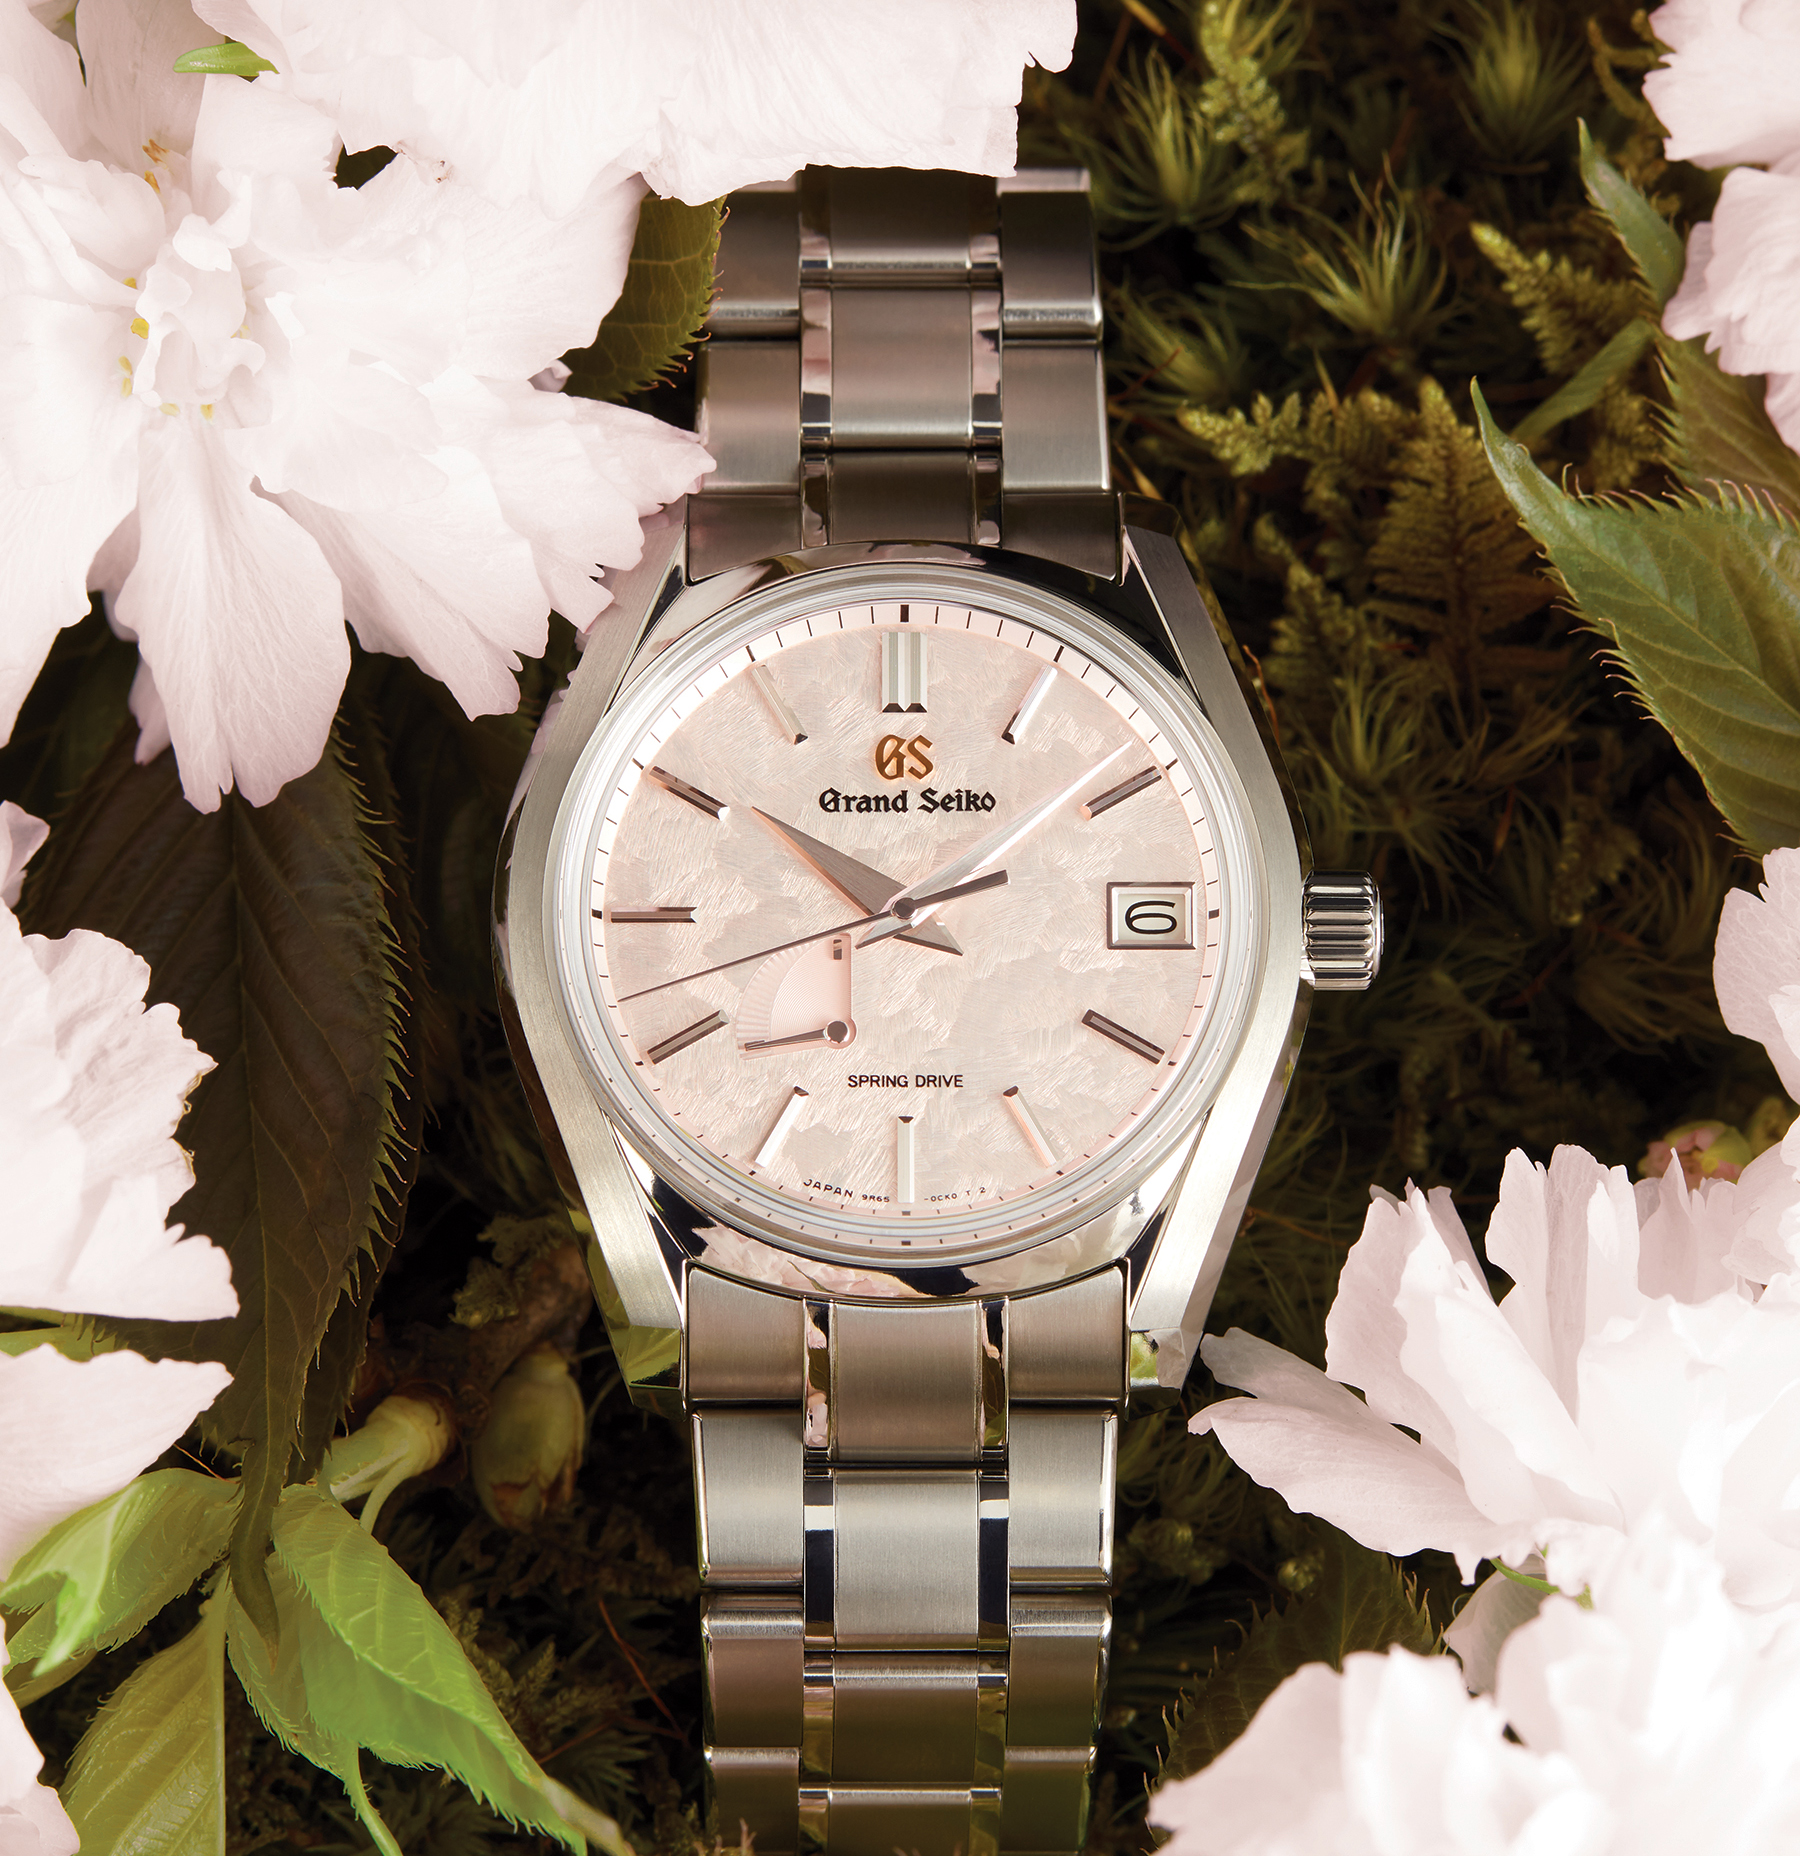 New Grand Seiko Collection Offers Watches for All Seasons – SURFACE